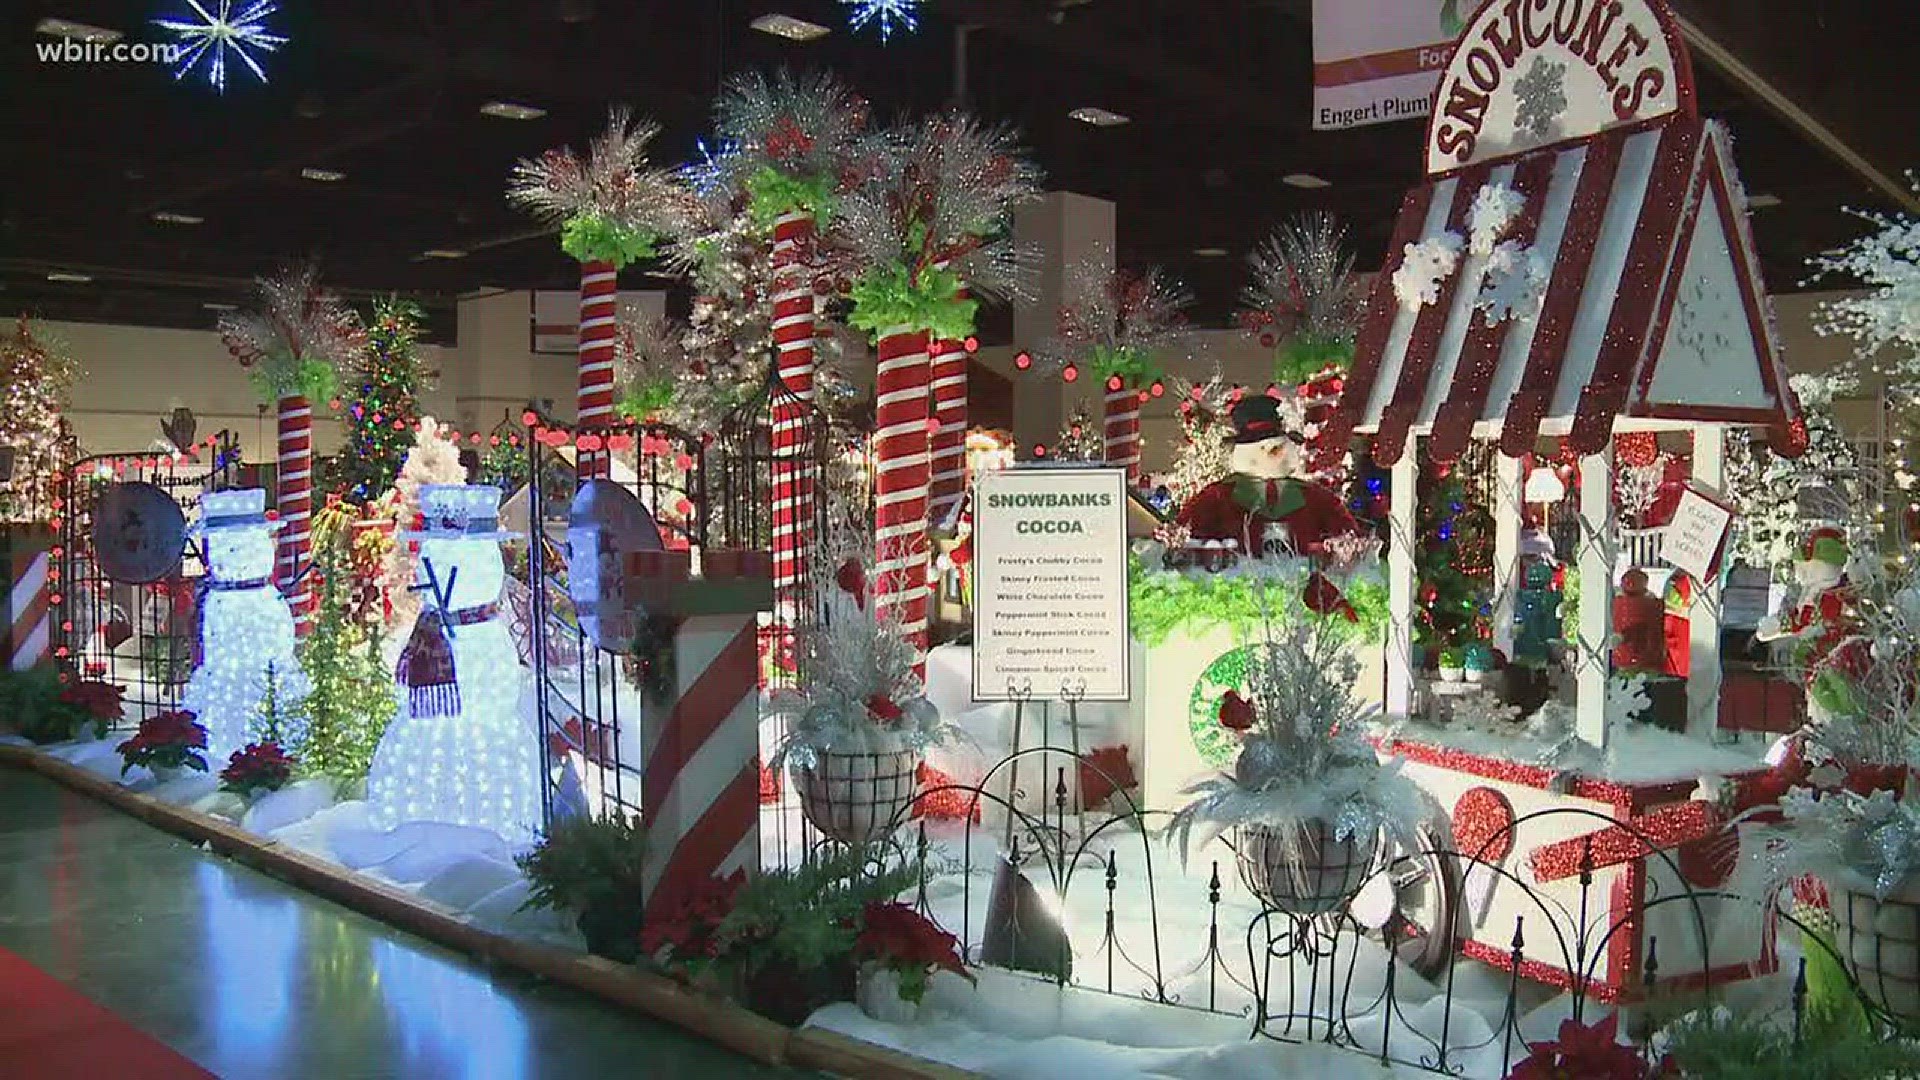 The annual Fantasy of Trees runs Nov. 22-26 at the Knoxville Convention Center. Admission is $8 adults. Visit fantasyoftrees.org 
November 15, 2017 -4pm